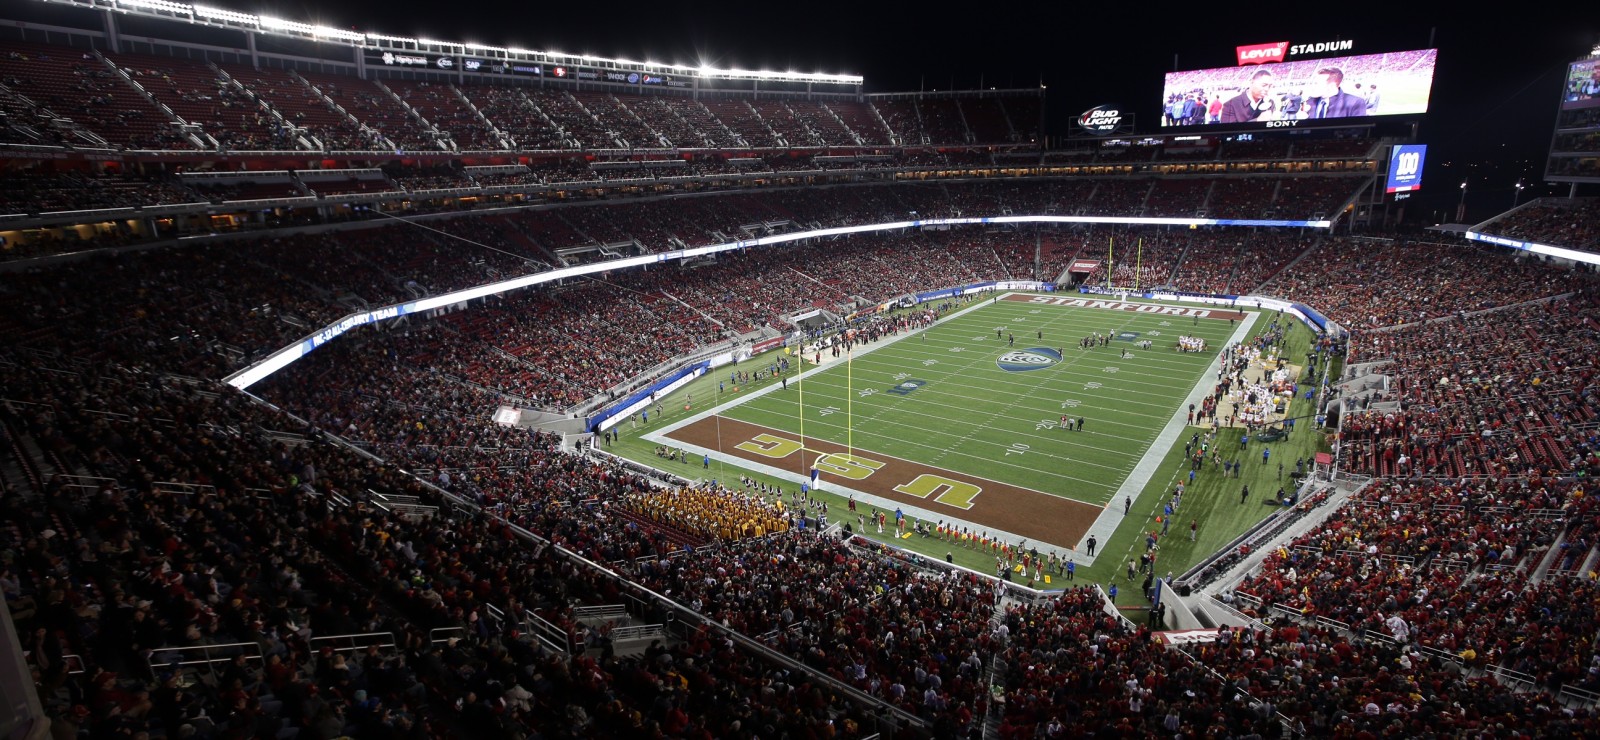 Pac12 Football Championship Game Tickets On Sale Thursday, August 4